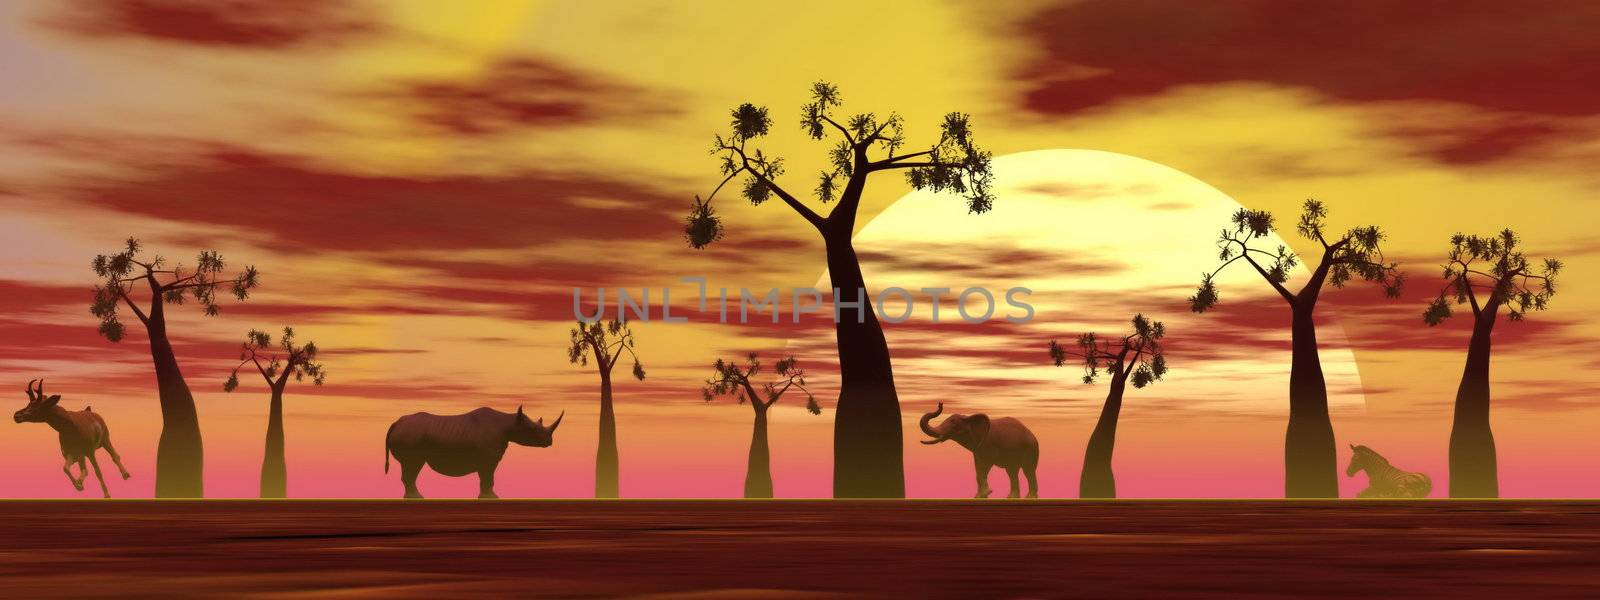 Shadows of animals in the savannah next to baobabs by sunset